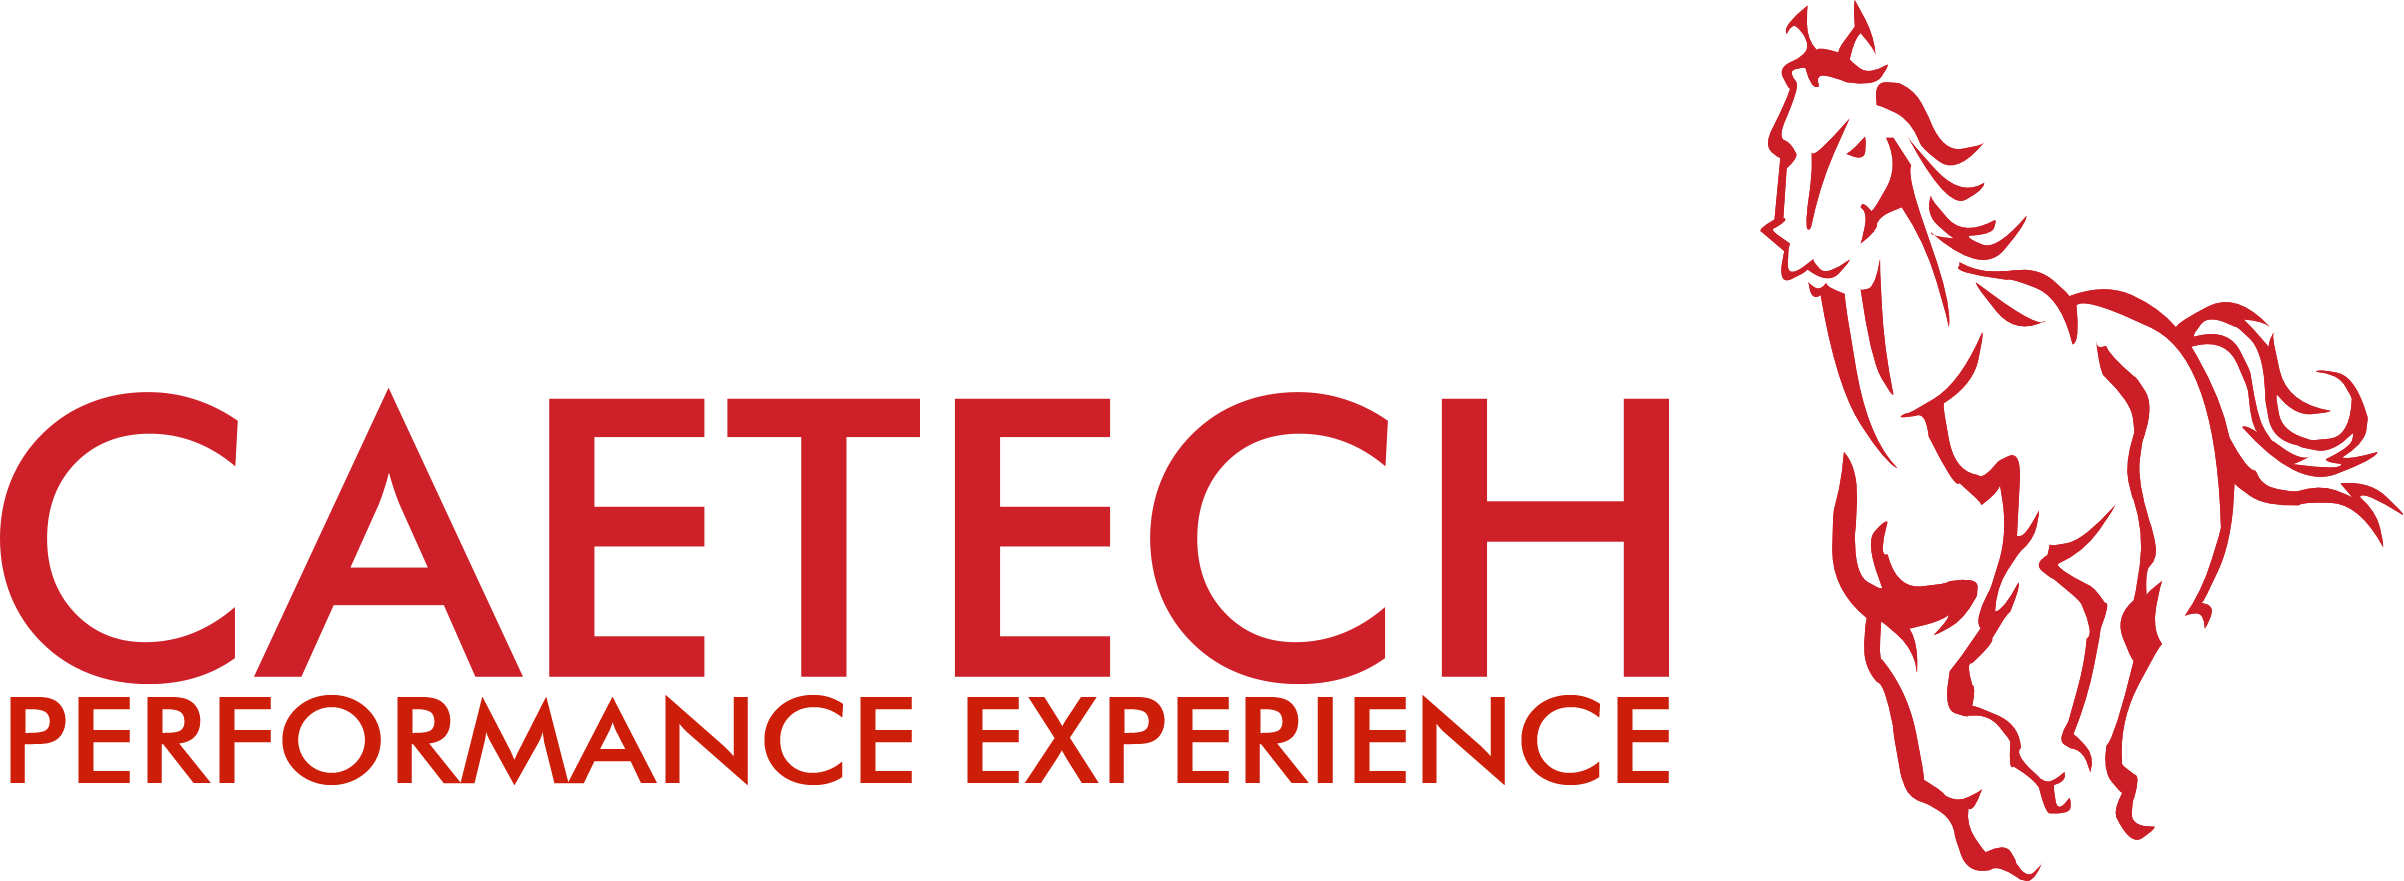 00_logo_caetech_performance_experience_Nero.png